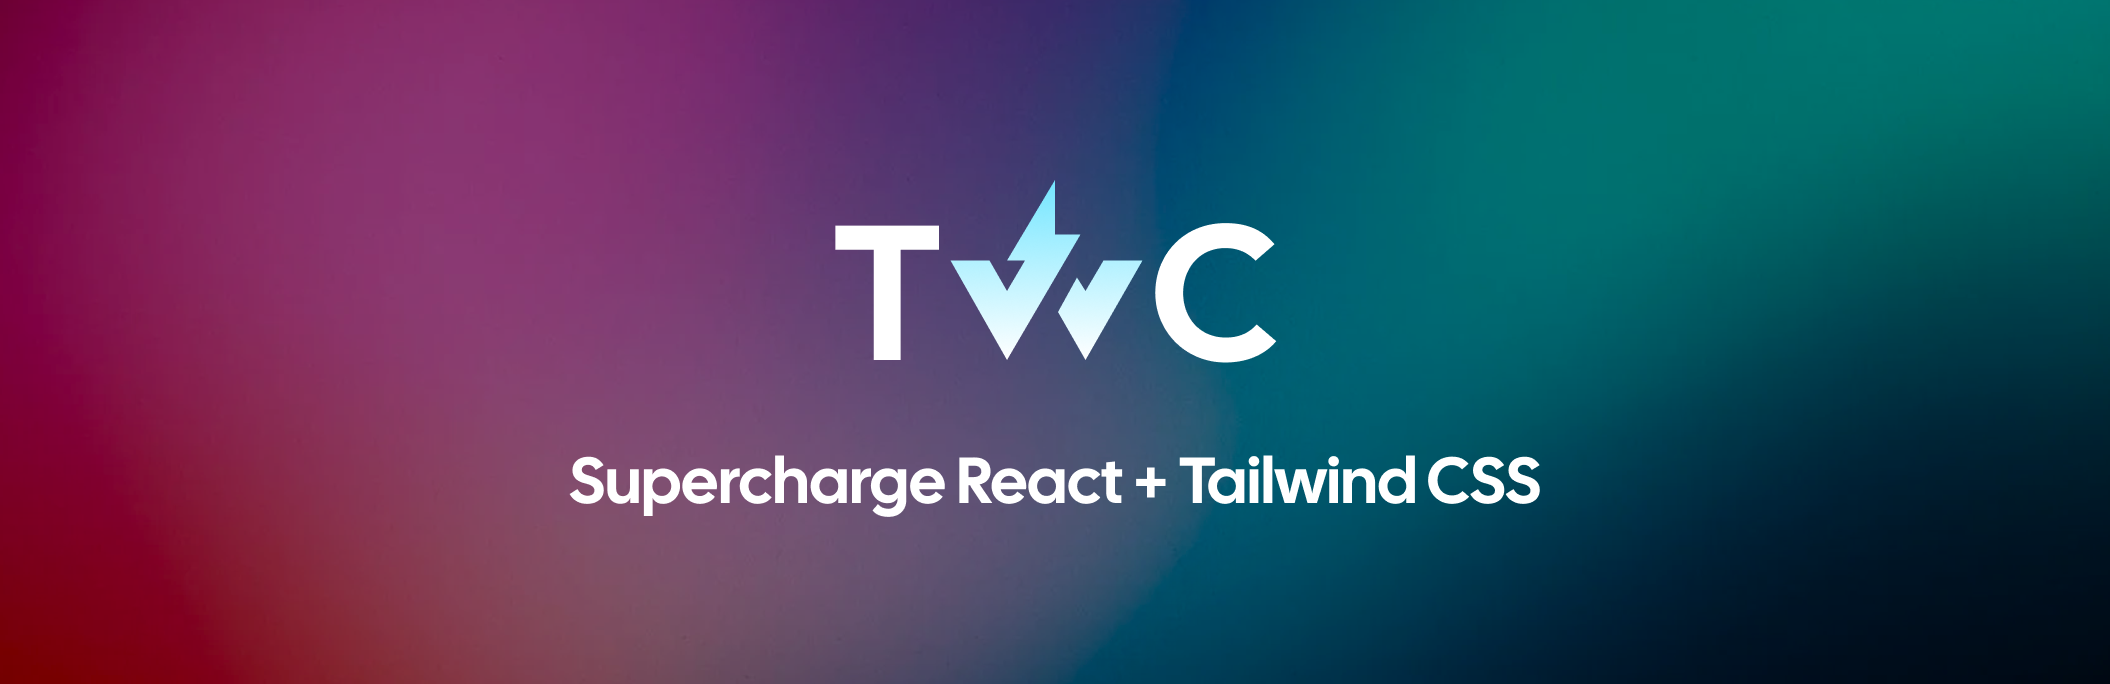 TWC — Supercharge React + Tailwind CSS